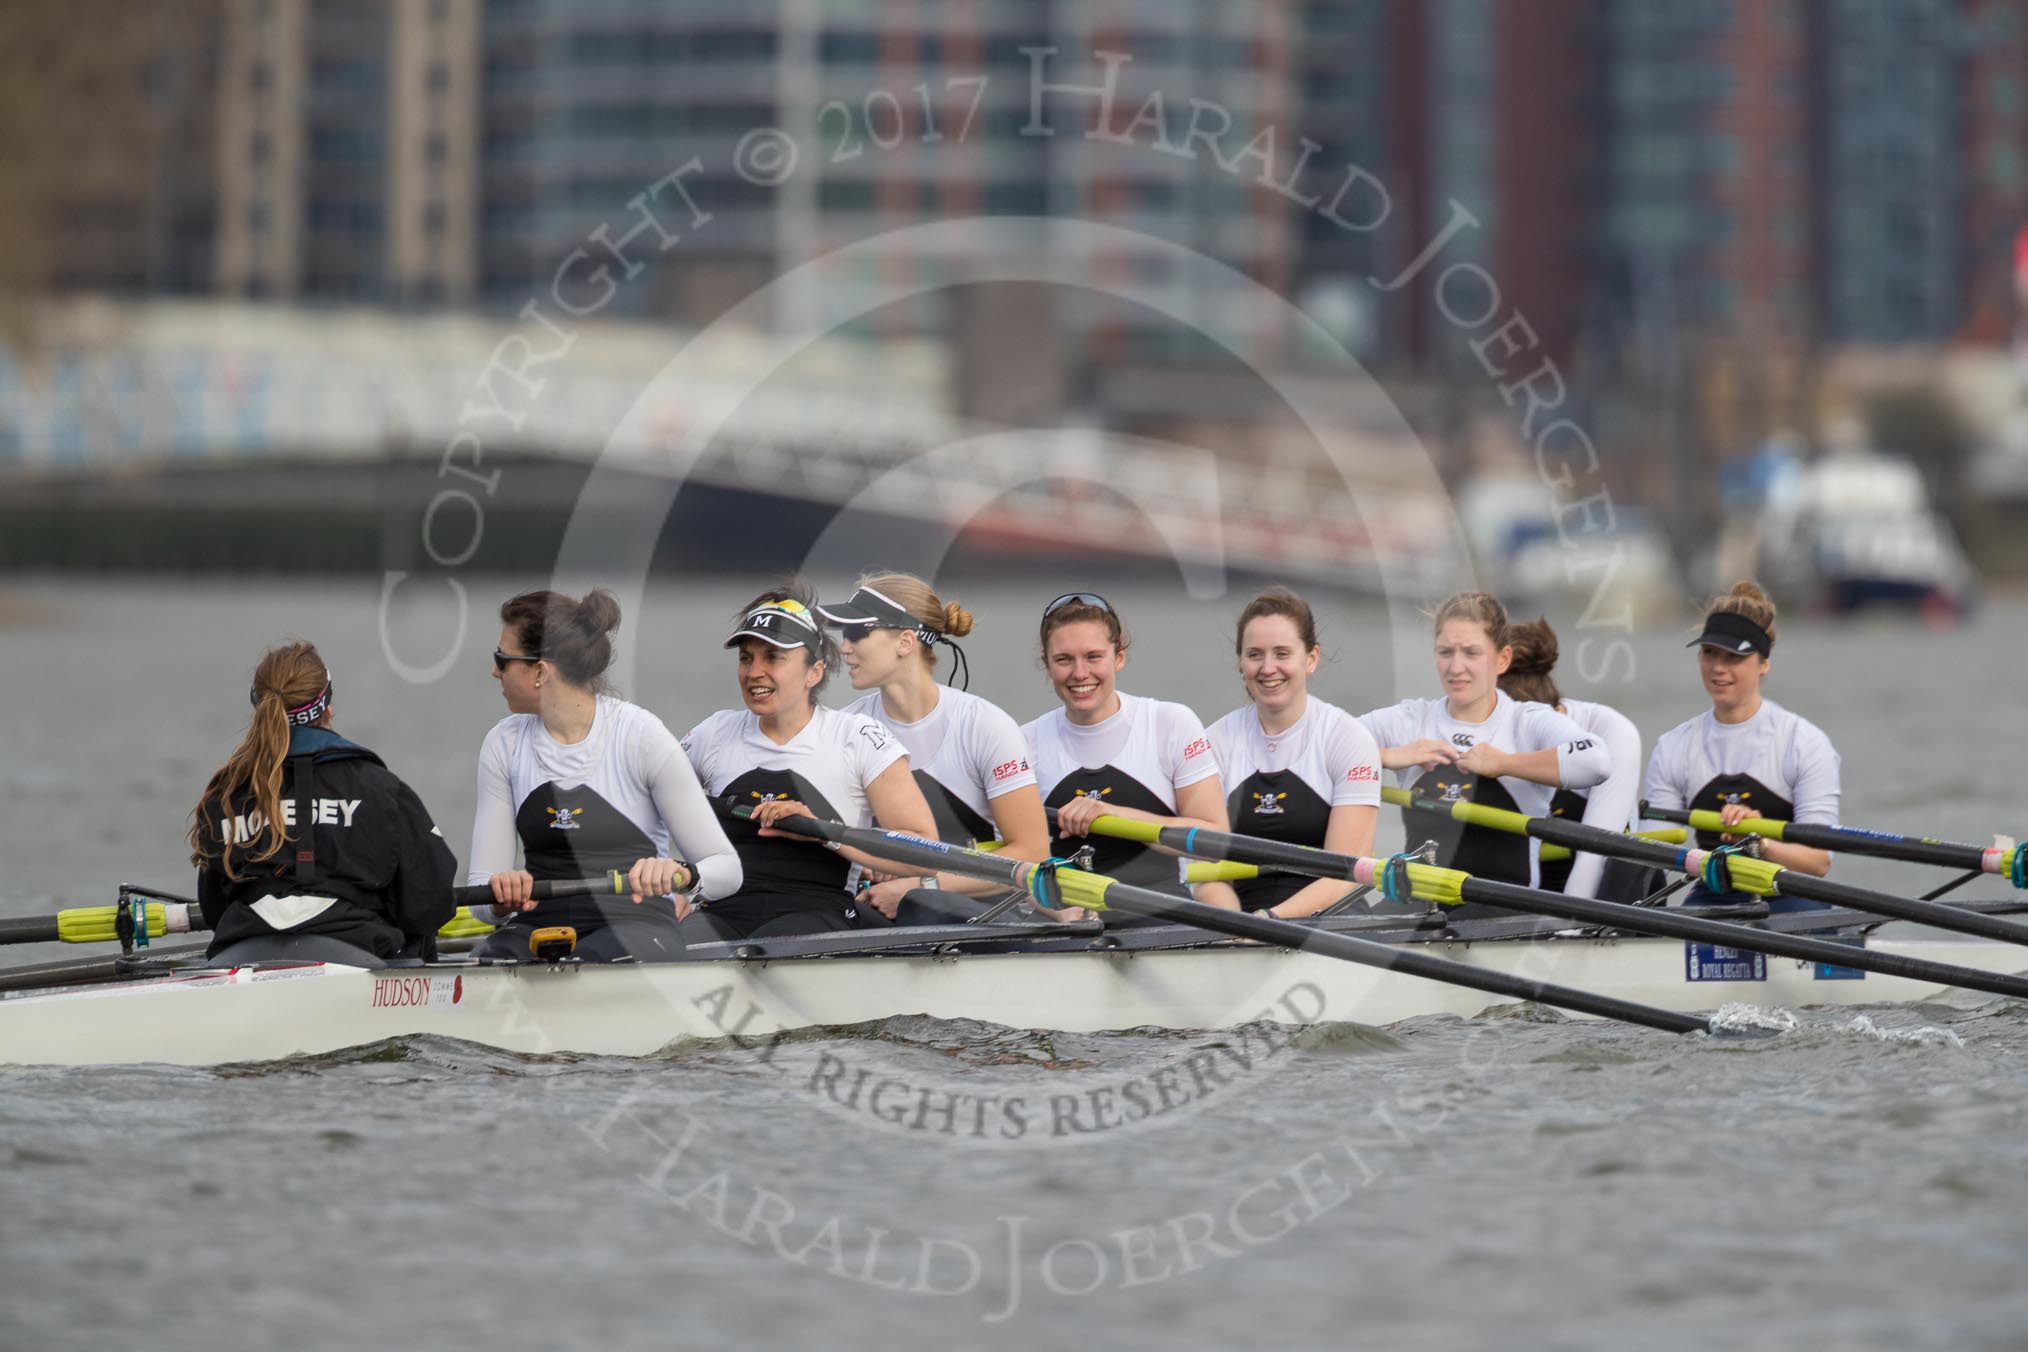 The Cancer Research UK Boat Race season 2017 - Women's Boat Race Fixture OUWBC vs Molesey BC: The Molesey boat - cox Anna Corderoy, S Ruth Whyman, 7 Gabriella Rodriguez, 6 Elo Luik, 5 Katie Bartlett, 4 Claire McKeown, 3 Lucy Primmer, 2 Caitlin Boyland, B Emma McDonald.
River Thames between Putney Bridge and Mortlake,
London SW15,

United Kingdom,
on 19 March 2017 at 15:51, image #35